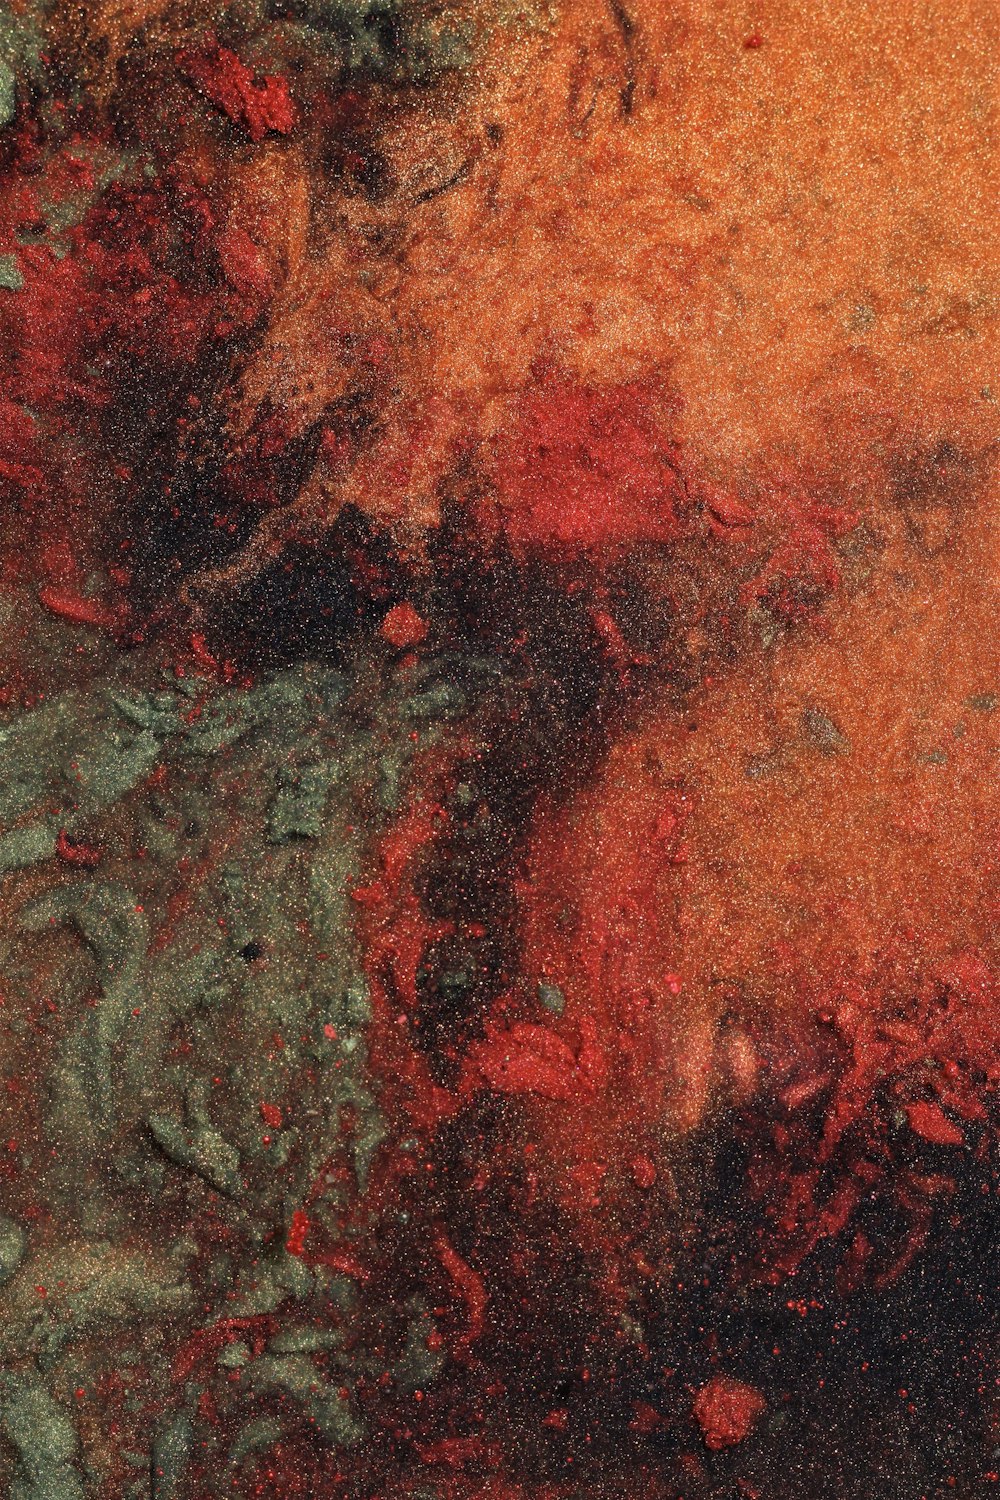 a close-up of a red and orange surface